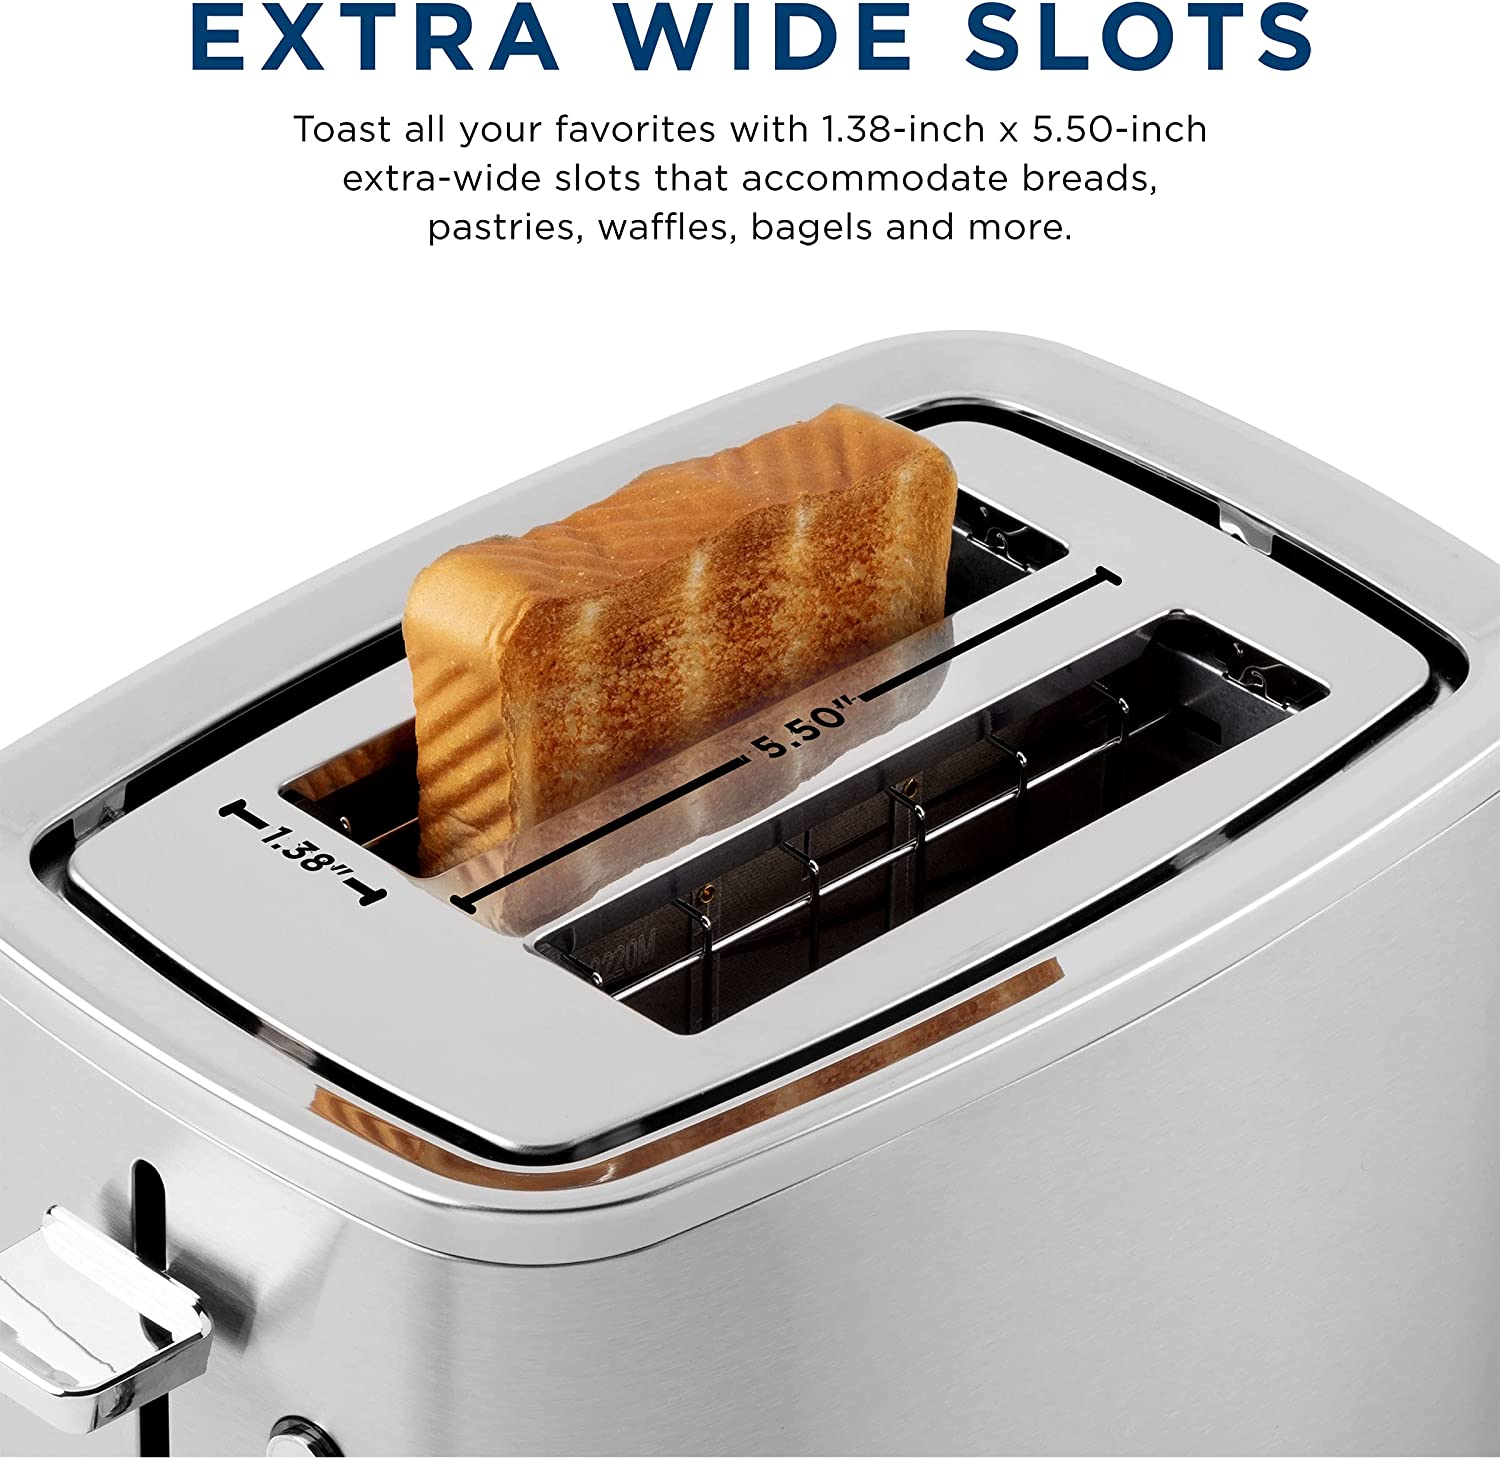 https://bigbigmart.com/wp-content/uploads/2023/05/GE-Stainless-Steel-Toaster-2-Slice-Extra-Wide-Slots-for-Toasting-Bagels-Breads-Waffles-More-7-Shade-Options-for-the-Entire-Household-to-Enjoy-Countertop-Kitchen-Essentials-850-Watts3.jpg